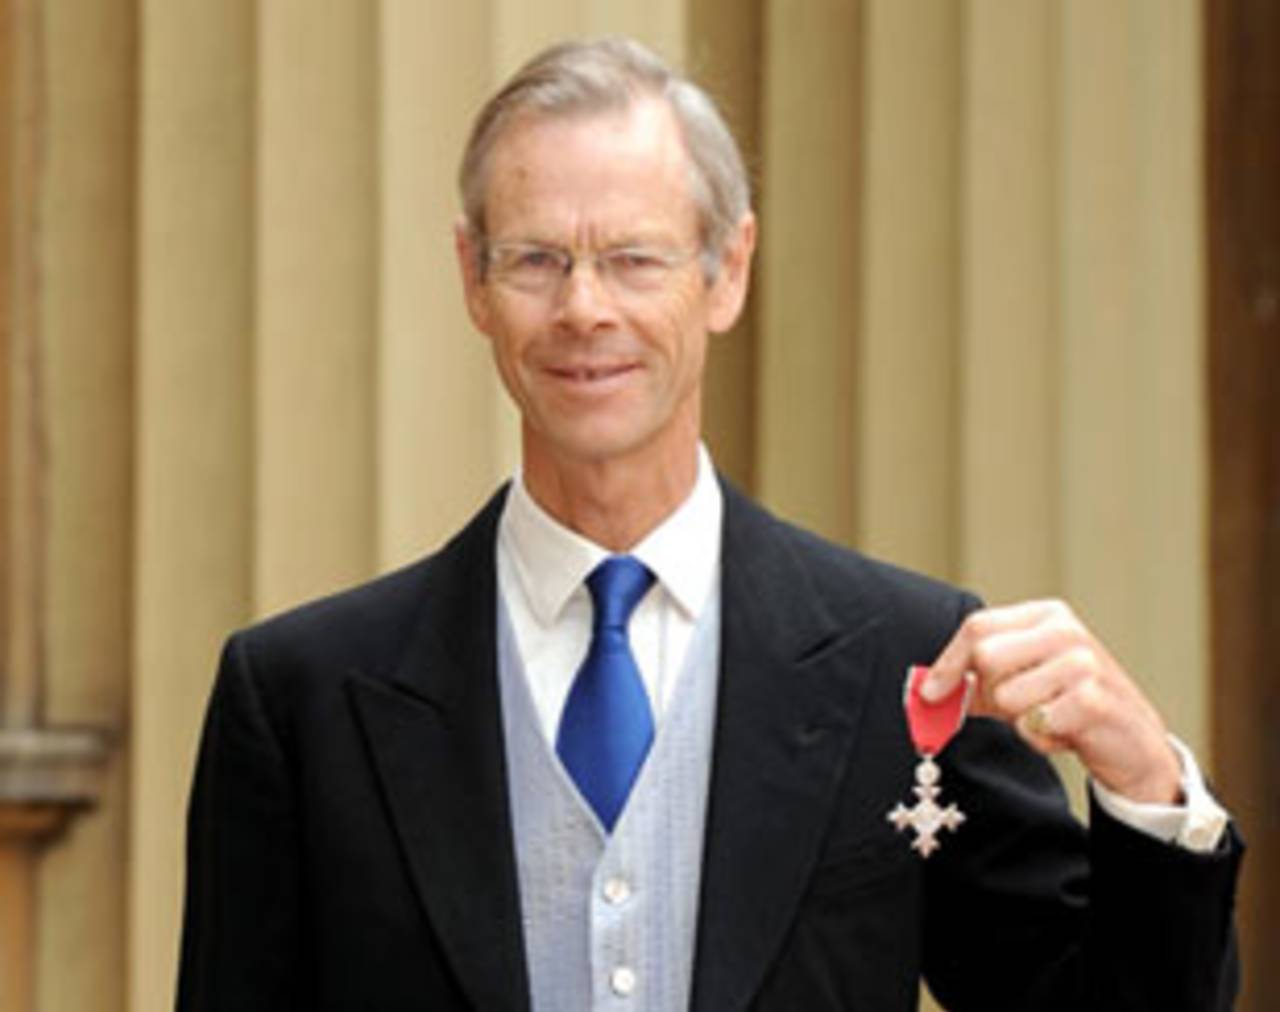 Broadcaster and journalist Christopher Martin-Jenkins poses outside Buckingham Palace after receiving his MBE, London, May 28, 2009 